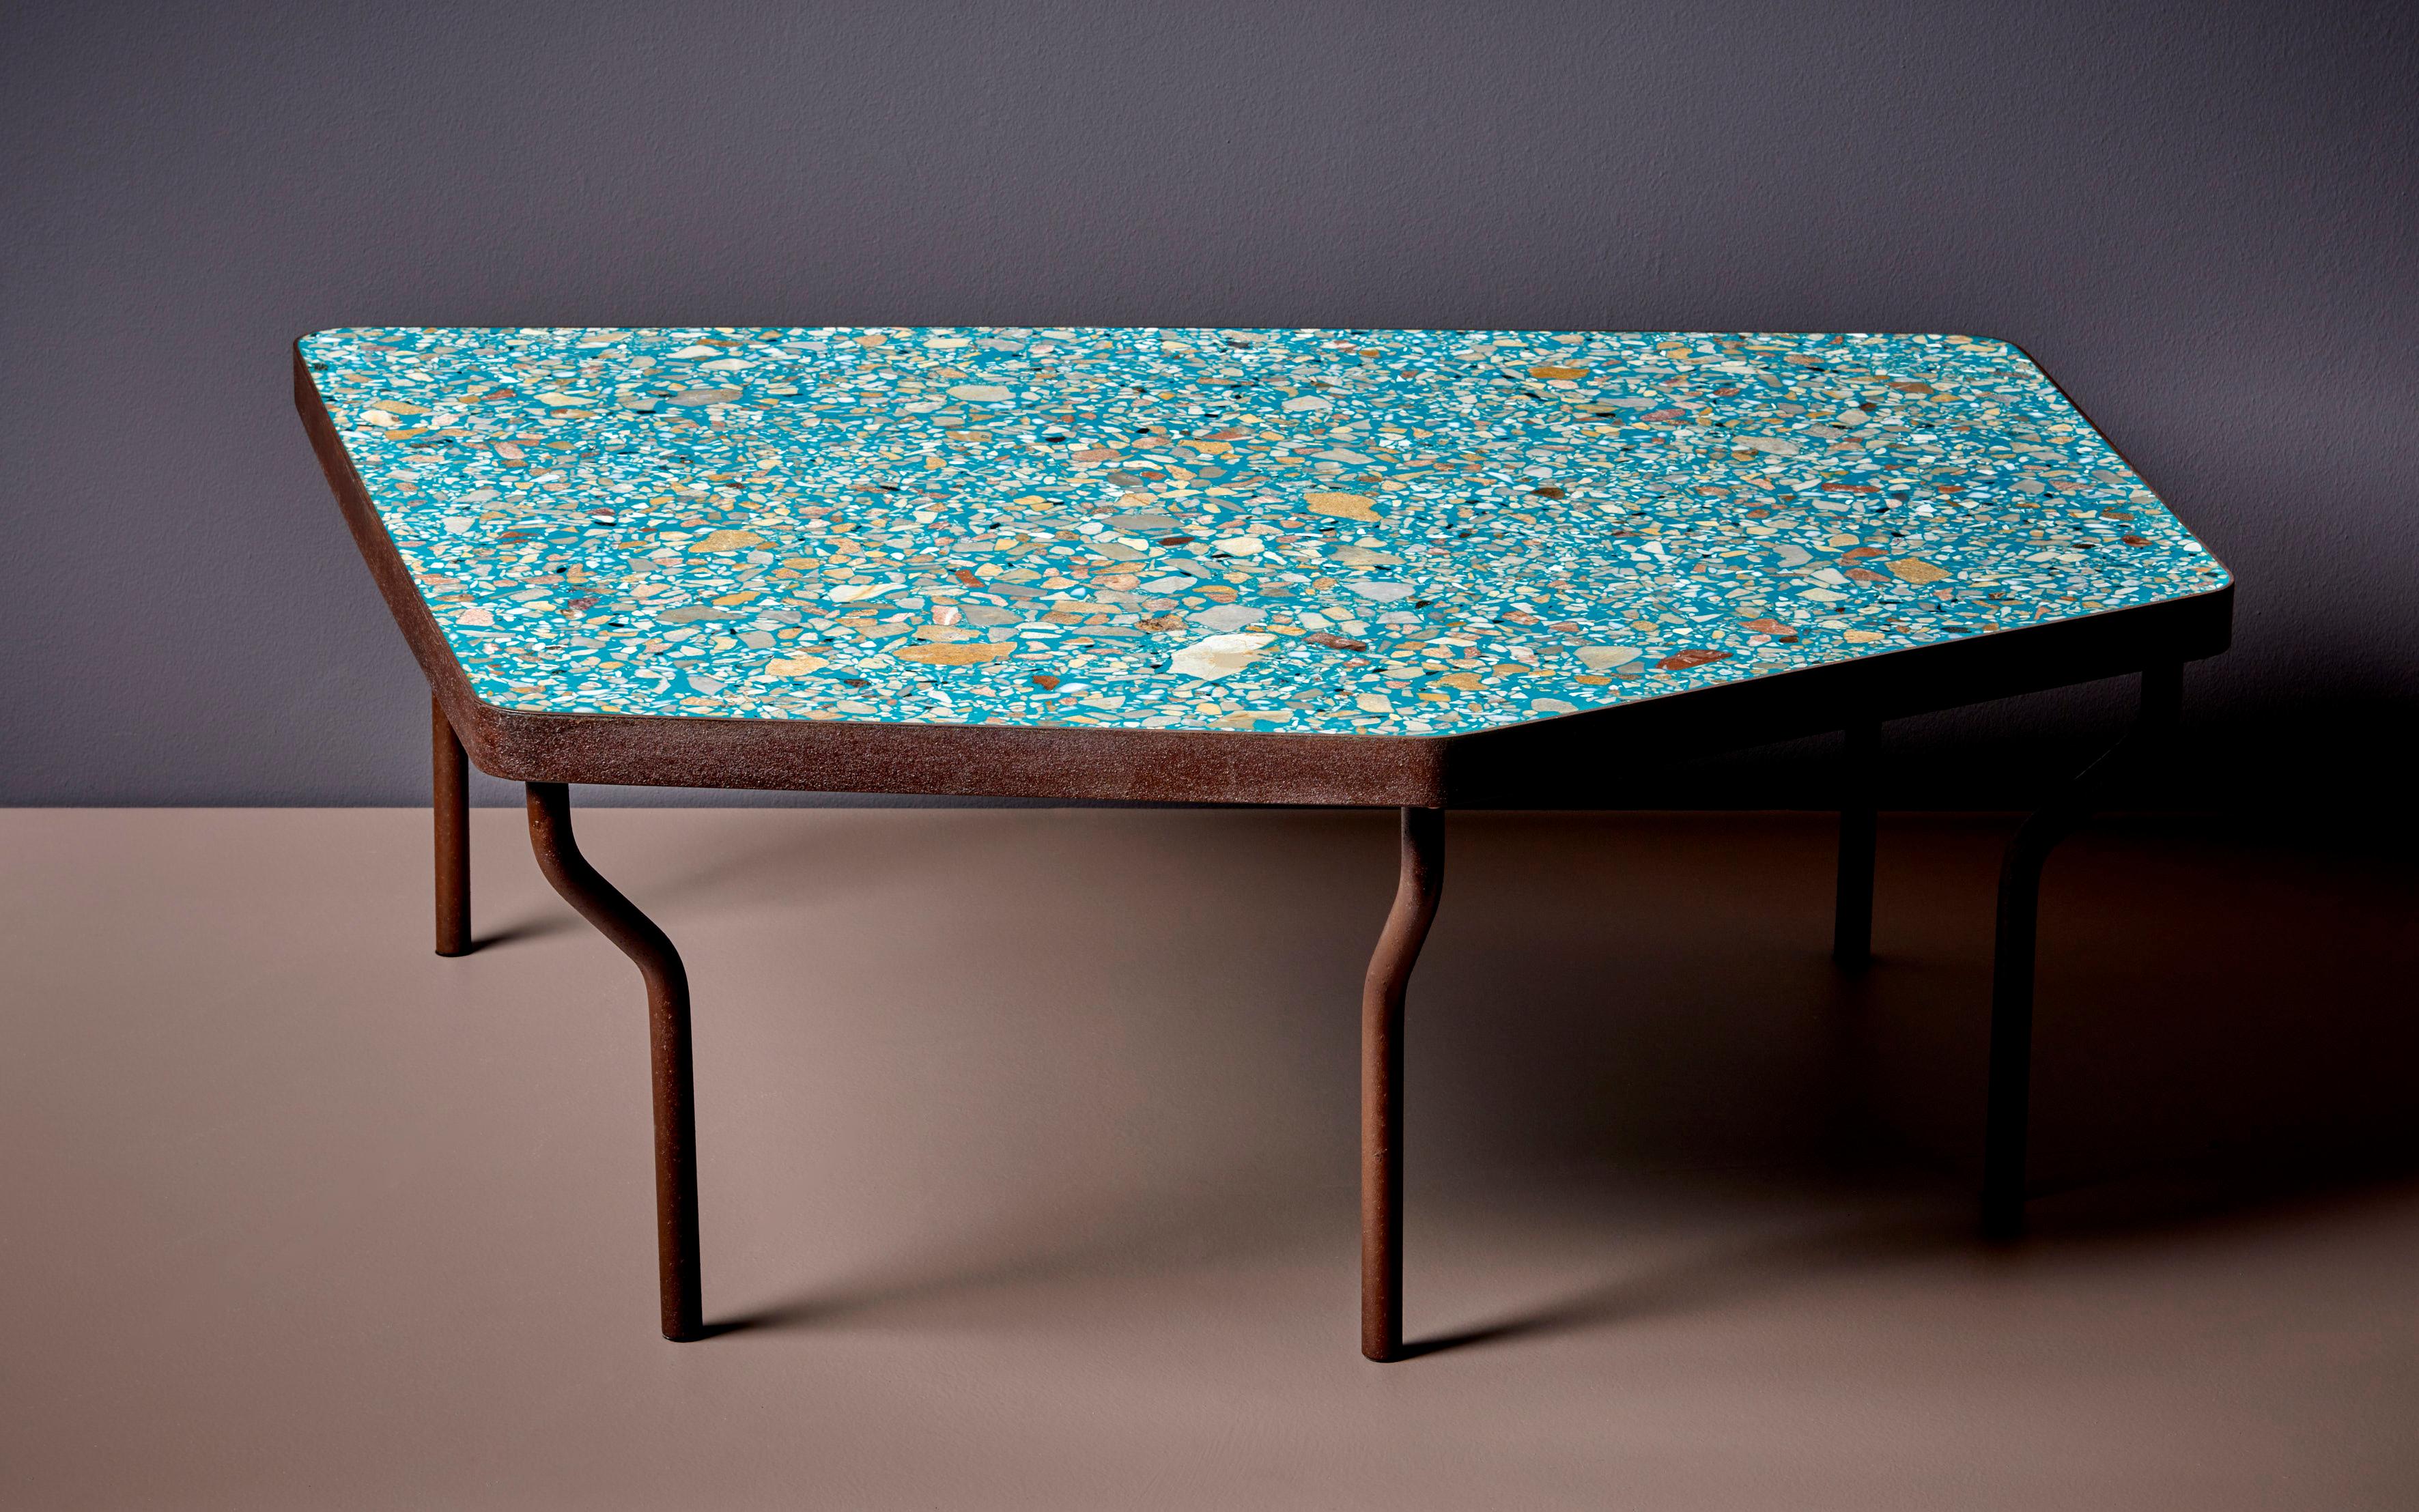 Each item made by Felix Muhrhofer is carefully hand-crafted and a unique, one-of-a-kind piece. Muhrhofer is an Austrian designer who primarily works with steel and terrazzo. His pieces, from coffee tables to bar counters, are all made by hand,